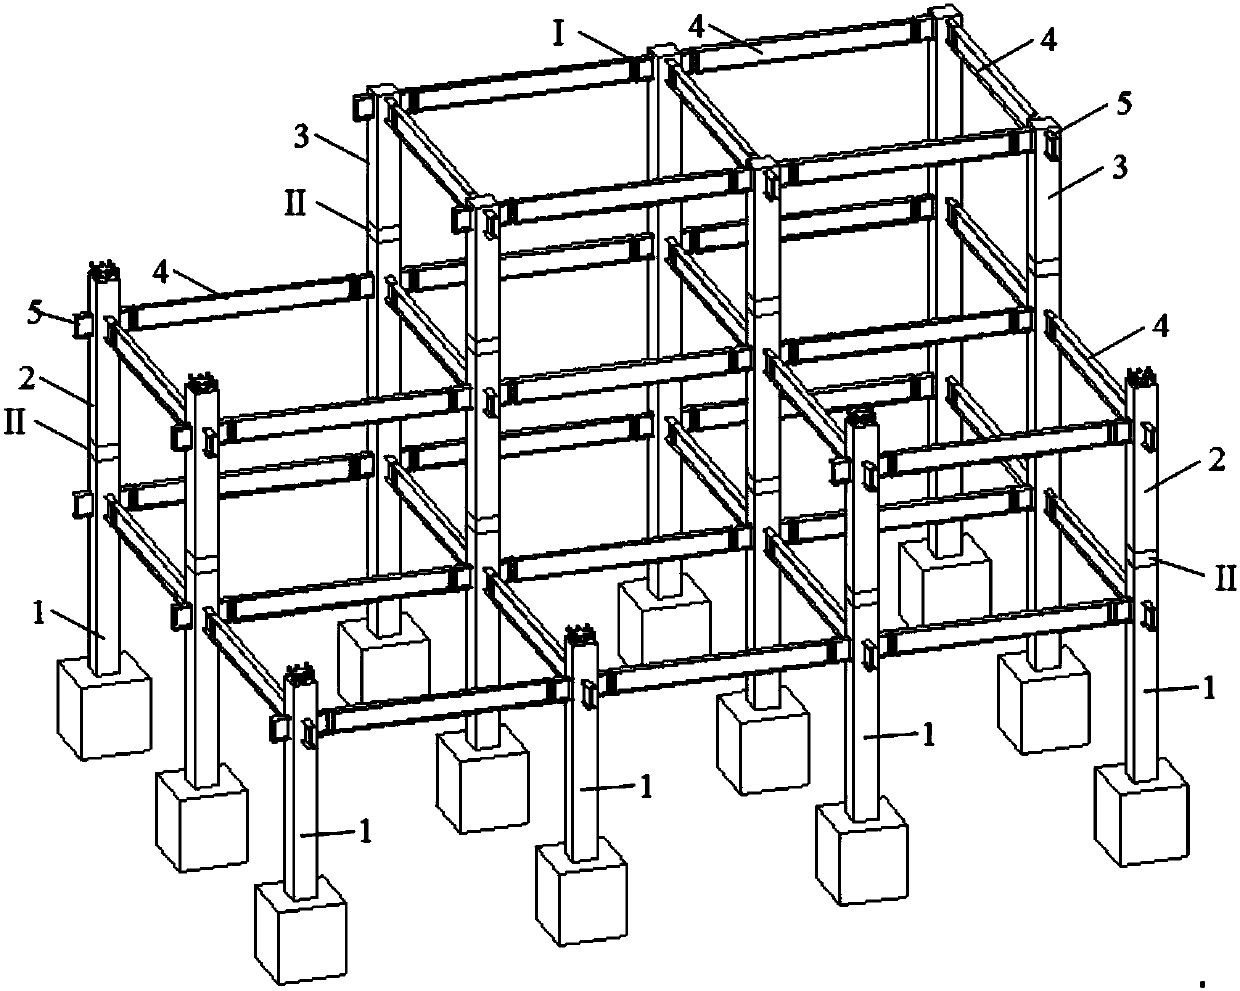 Prefabricated frame adopting combination of steel reinforced concrete columns and steel beams